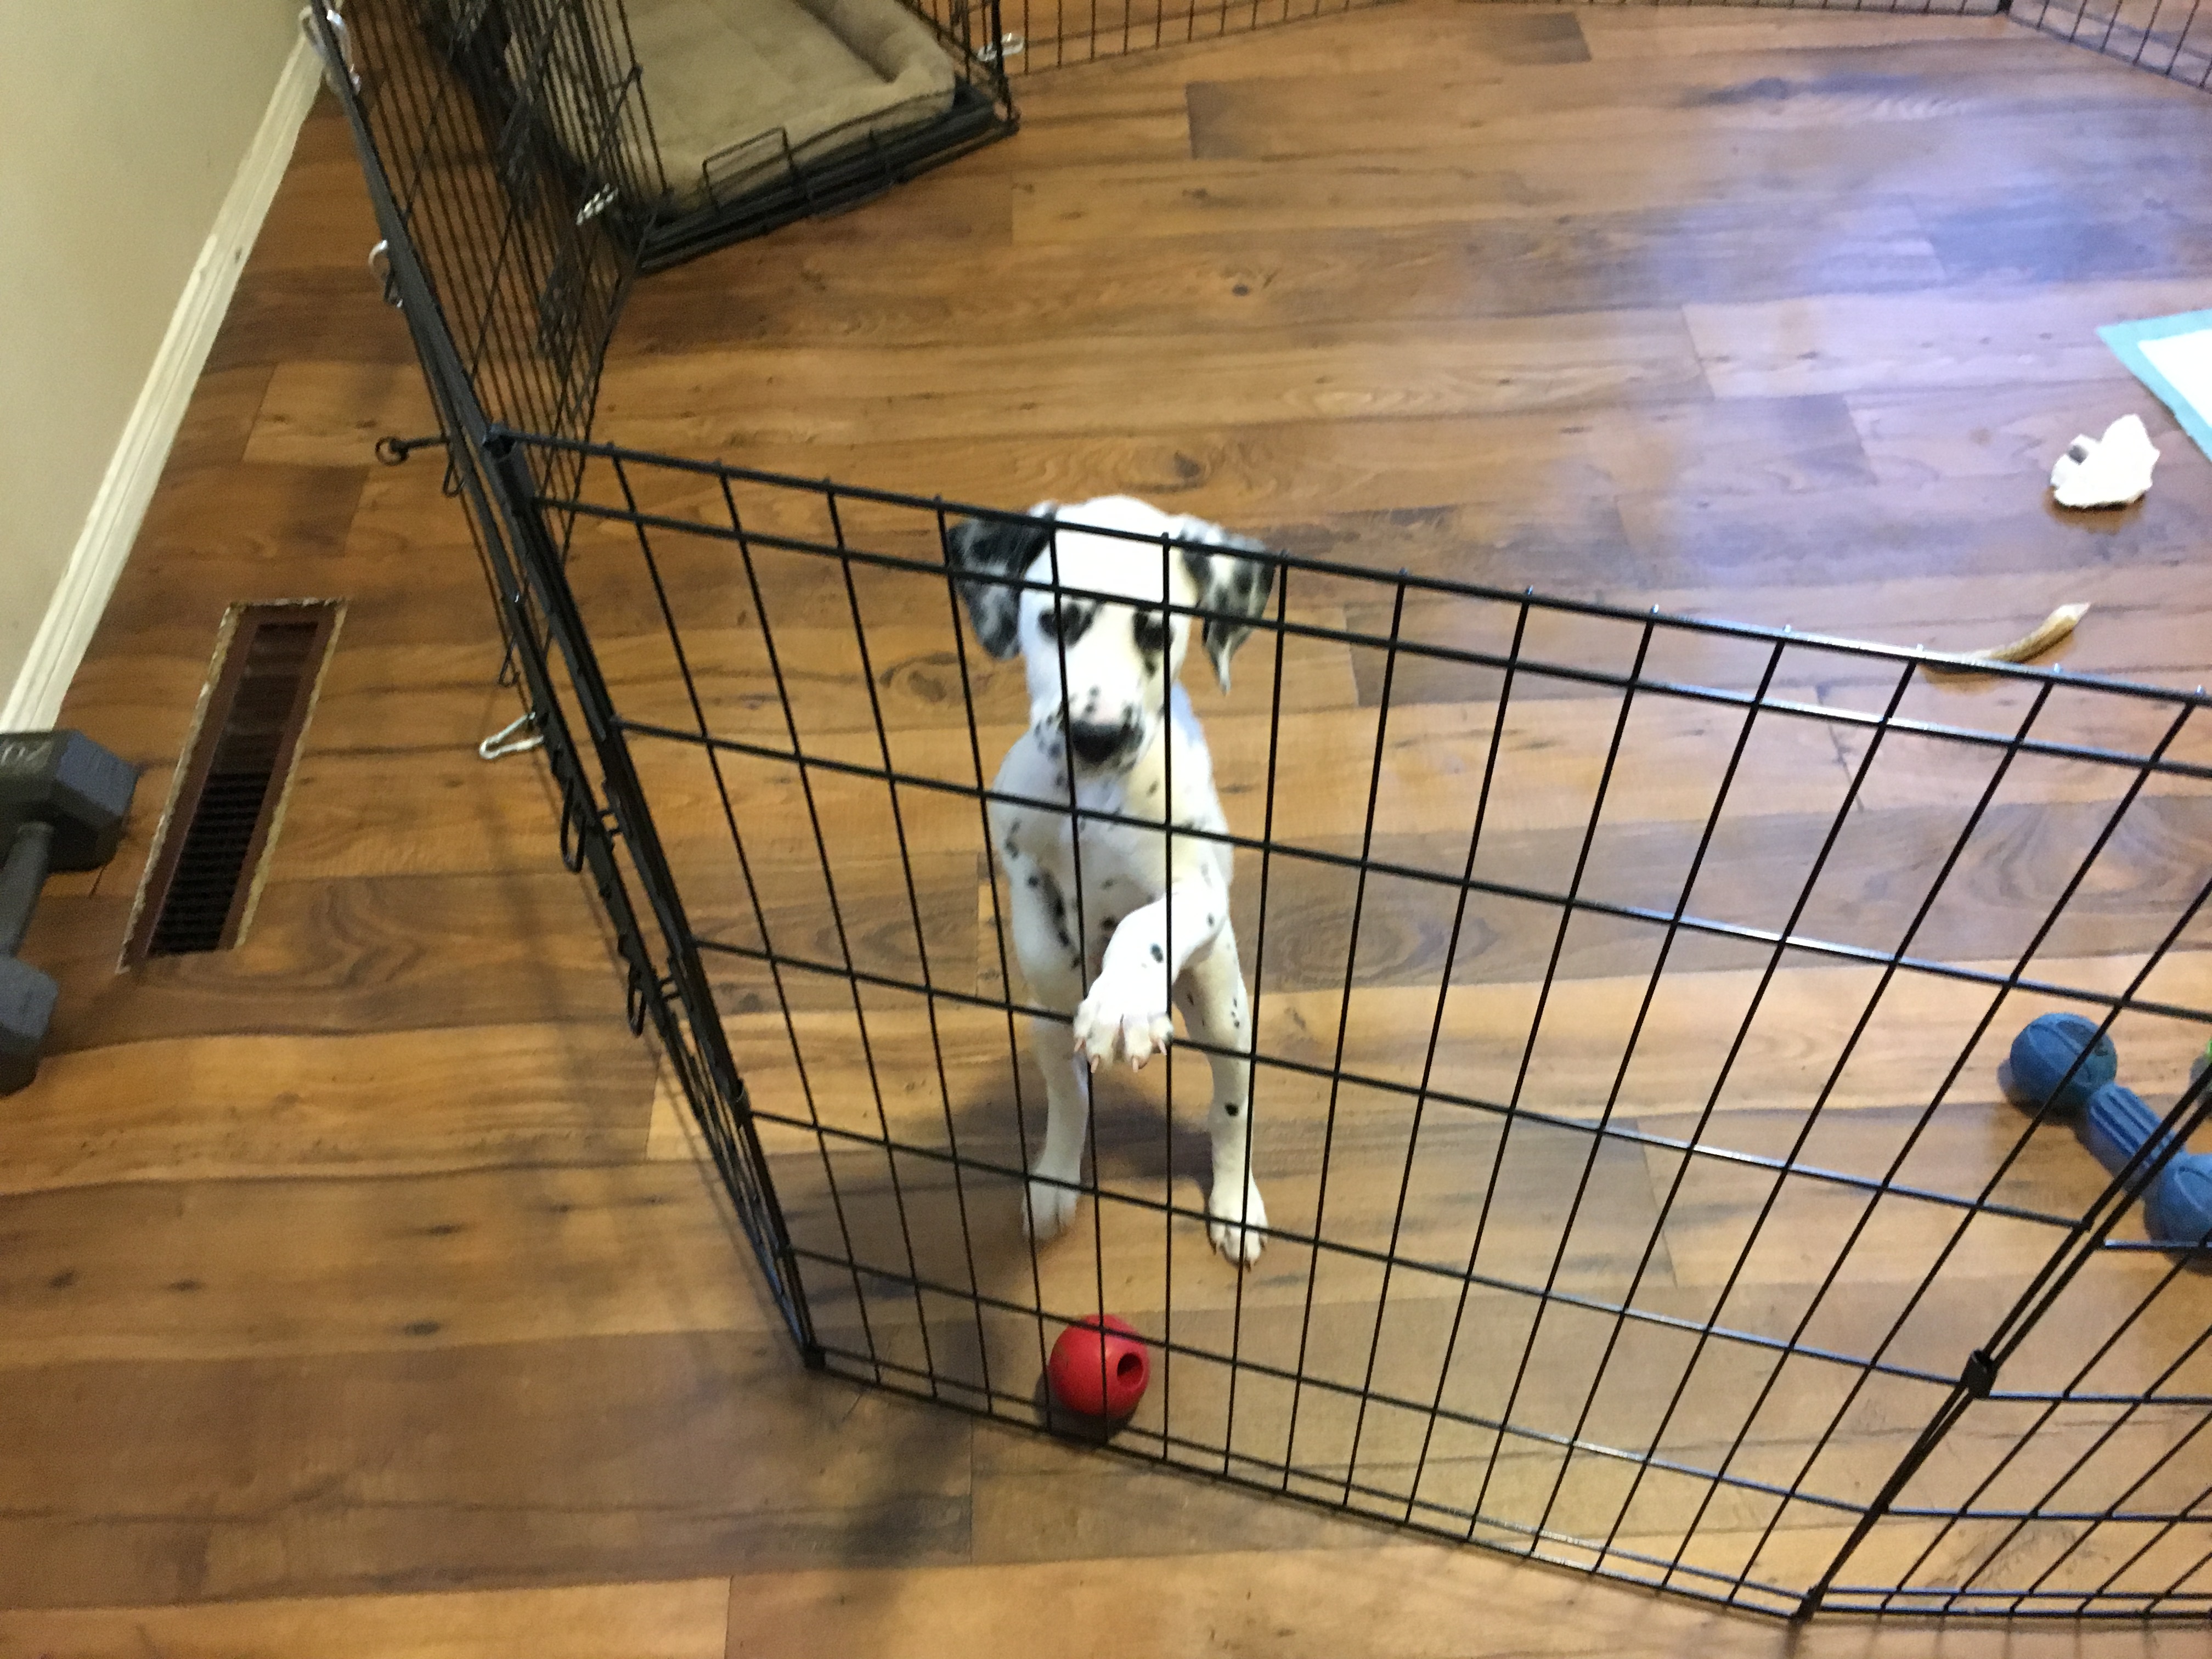 How To Keep Dog From Climbing Out Of Pen